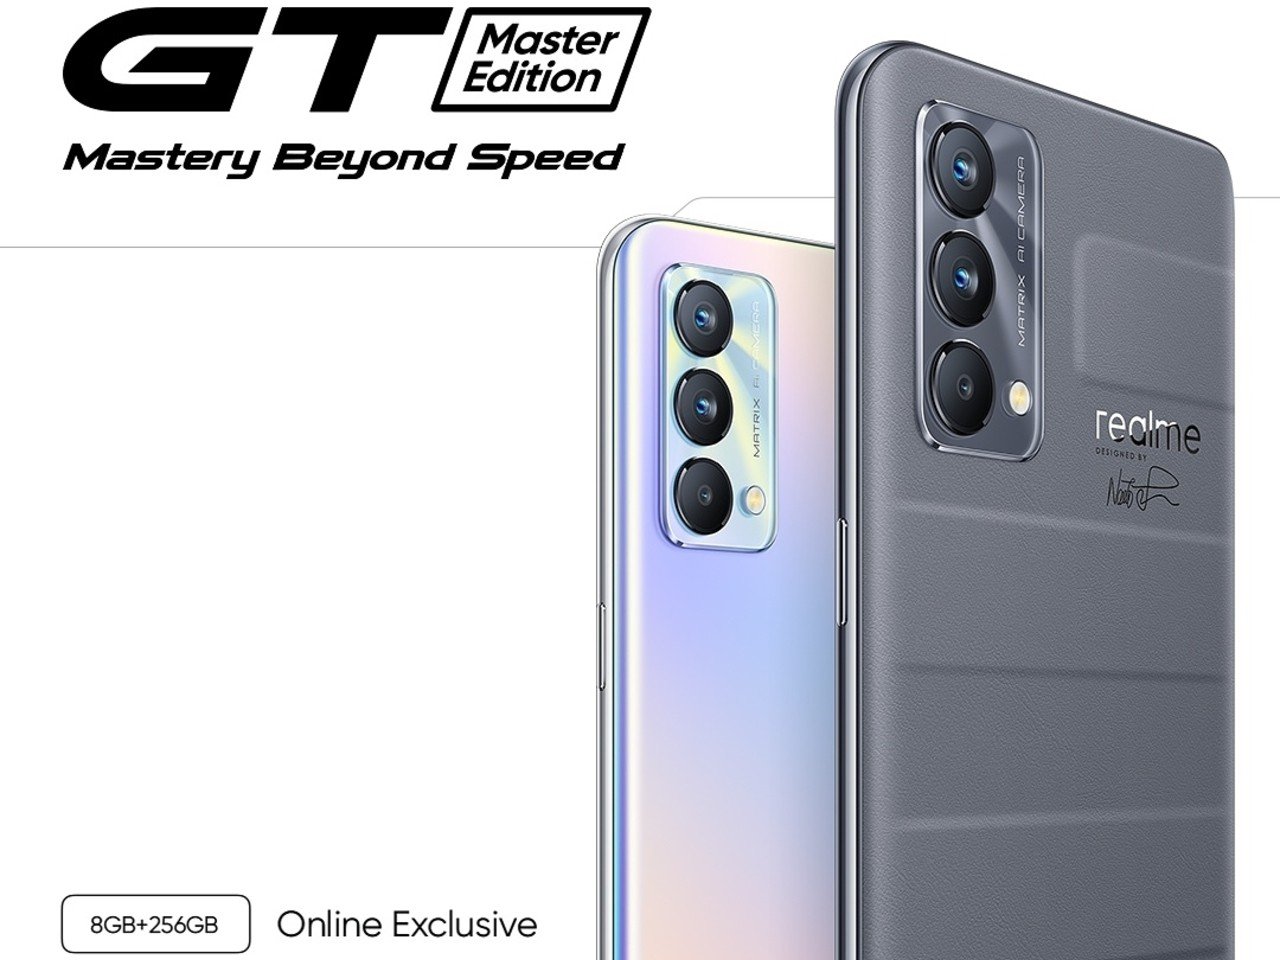 realme-GT-Master-Edition-Launch-Indonesia.